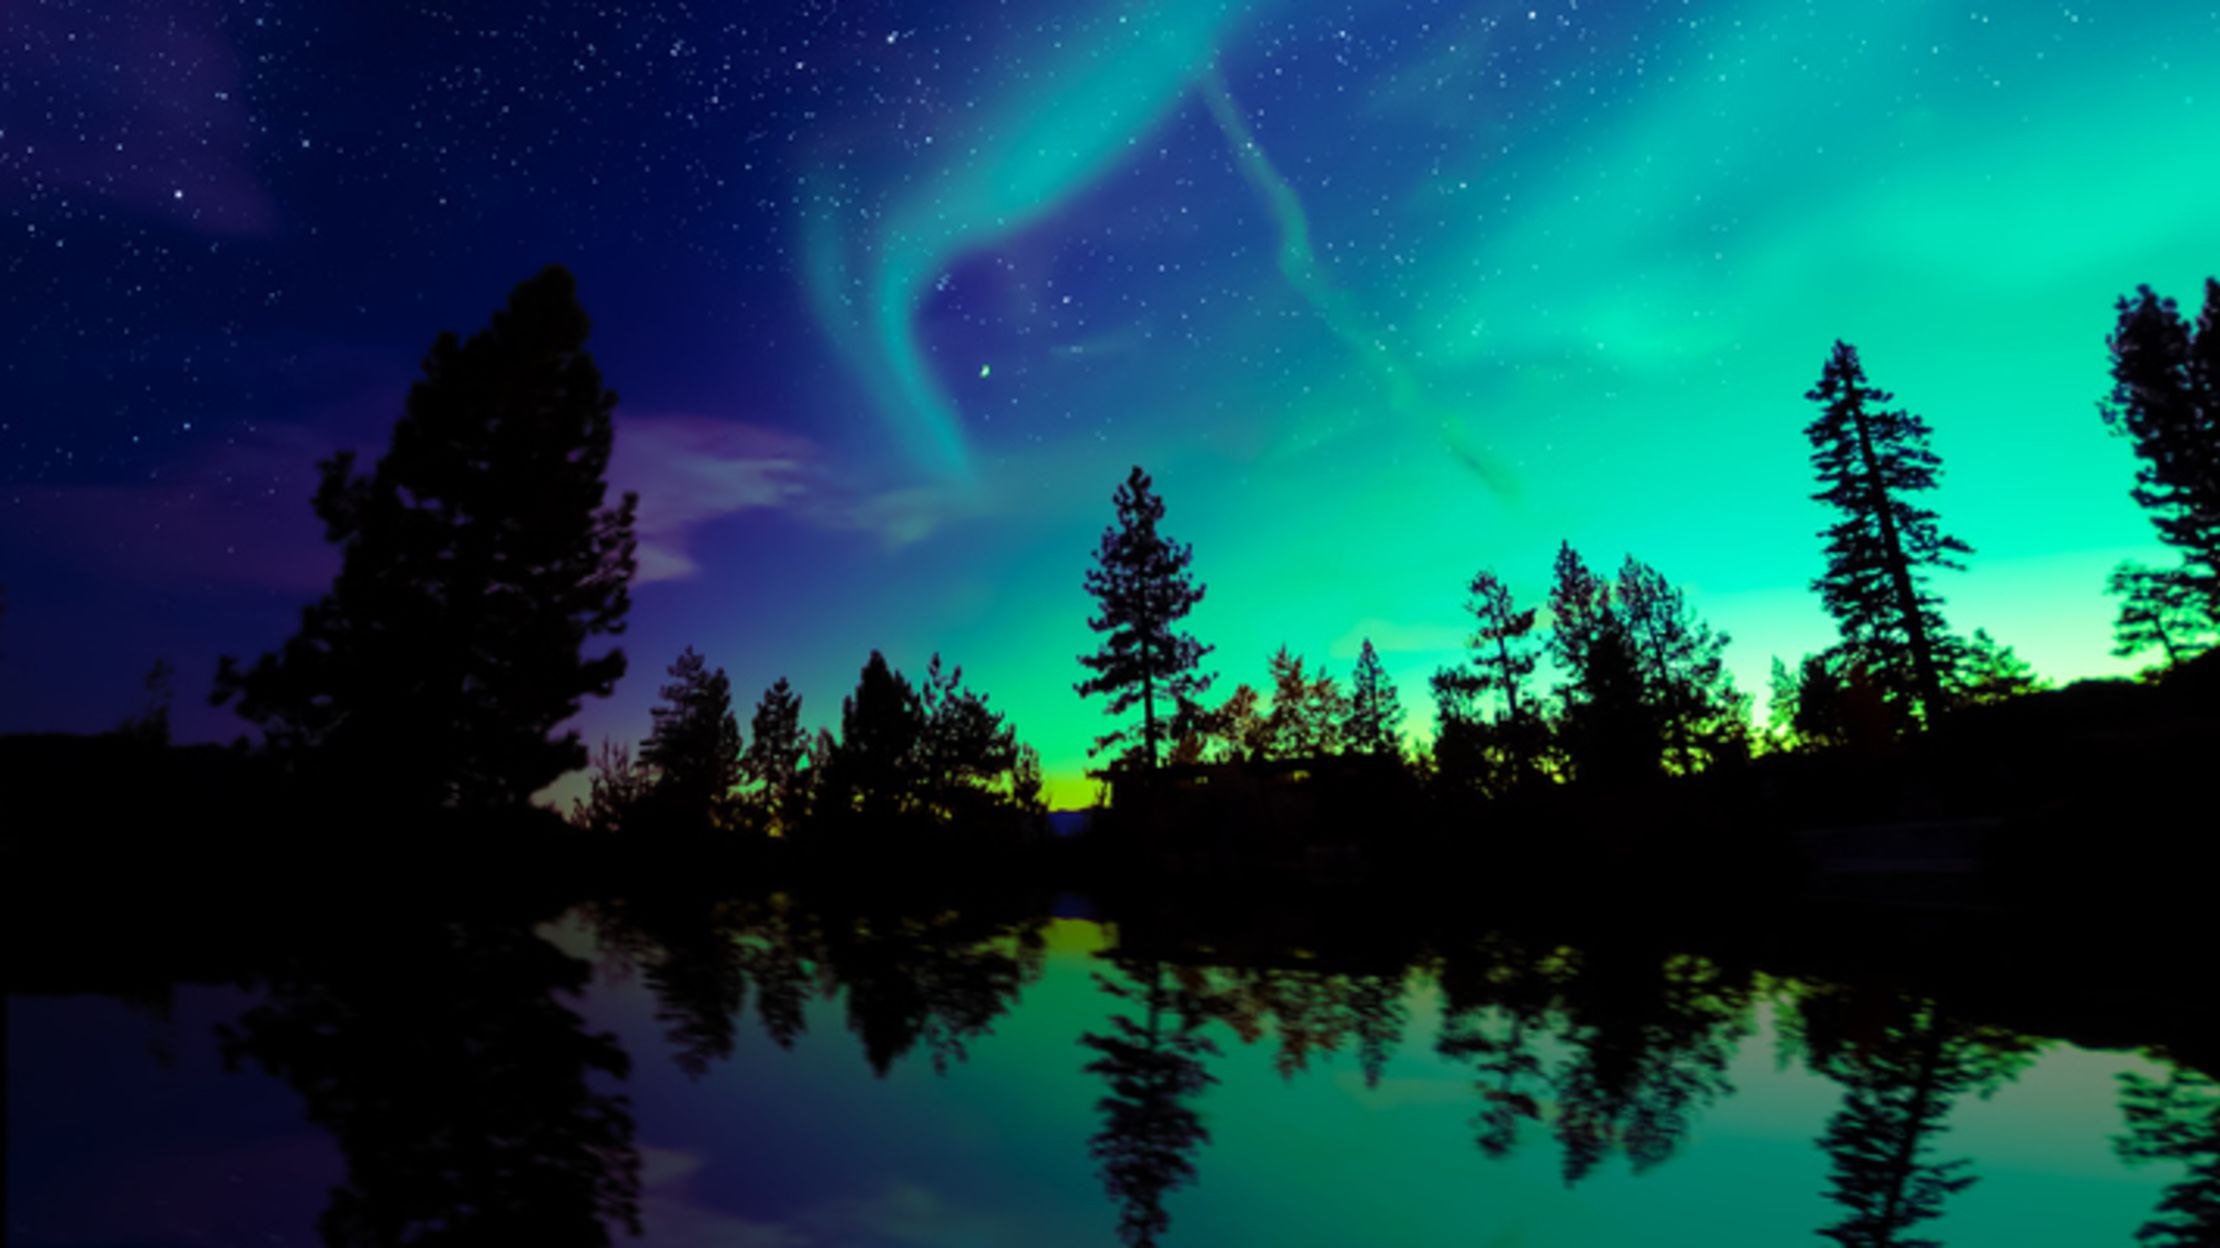 5 Quick, Inexpensive Destinations to View the Northern Lights Mental